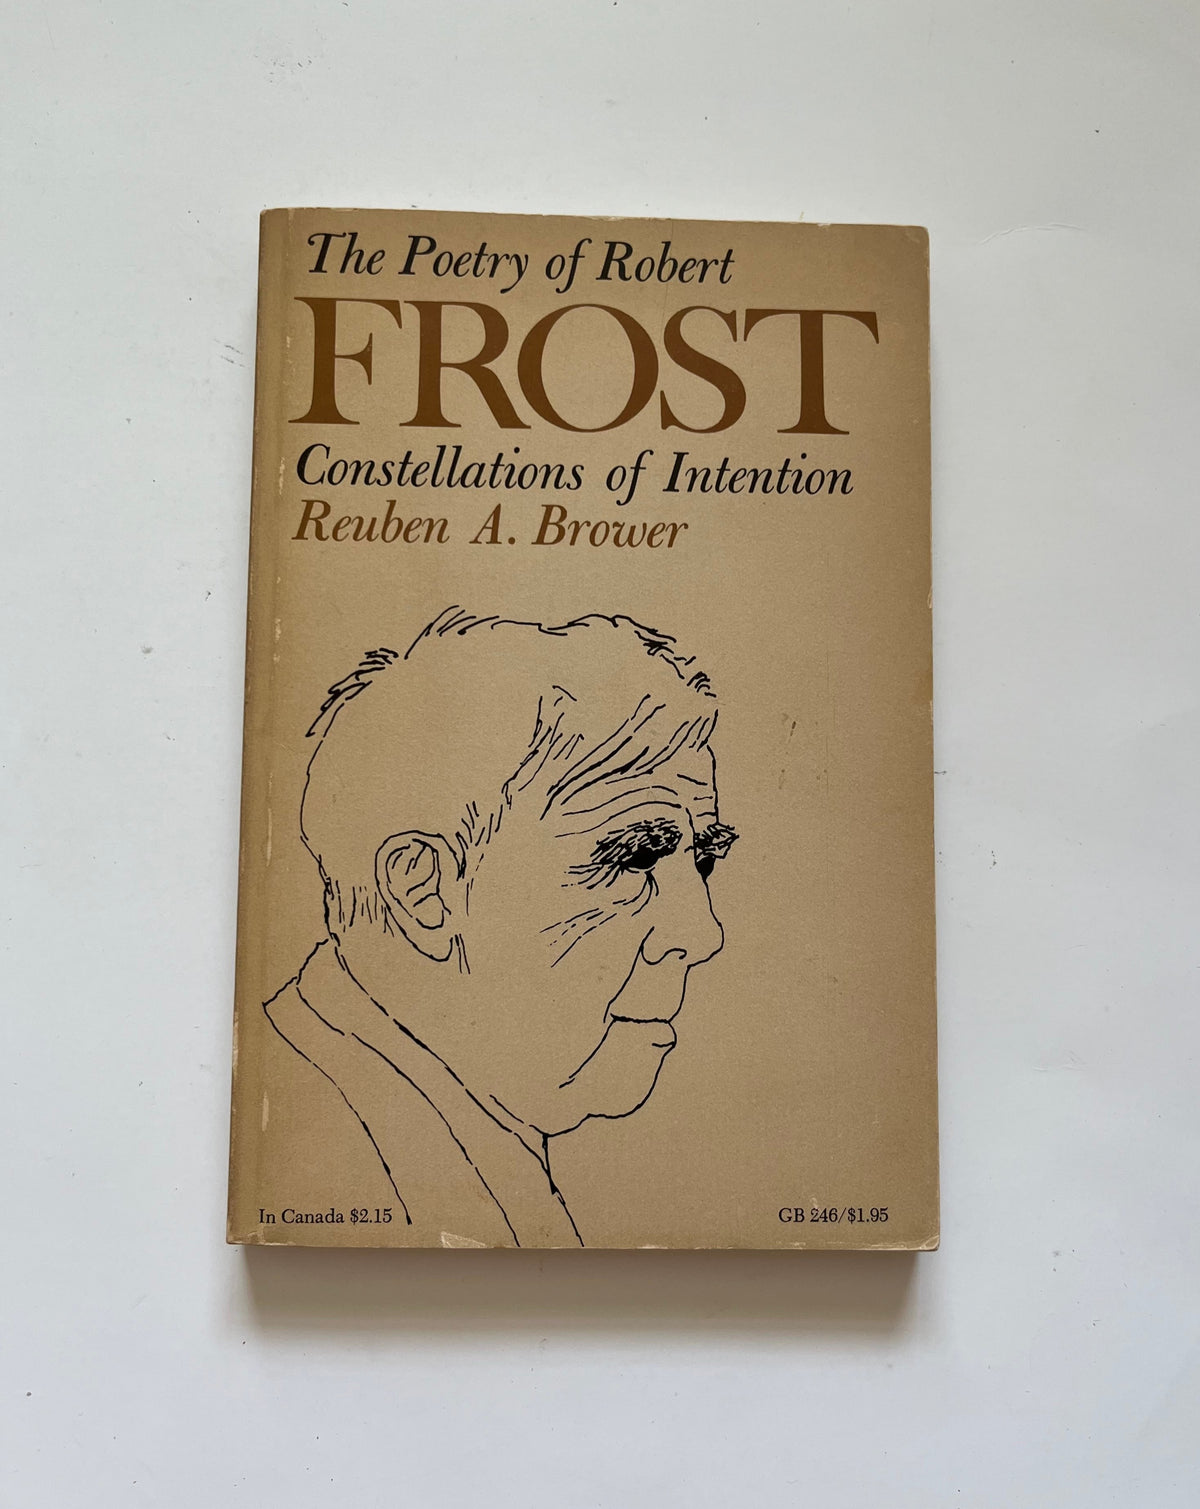 The Poetry of Robert Frost: Constellations of Intention by Reuben A. Brower